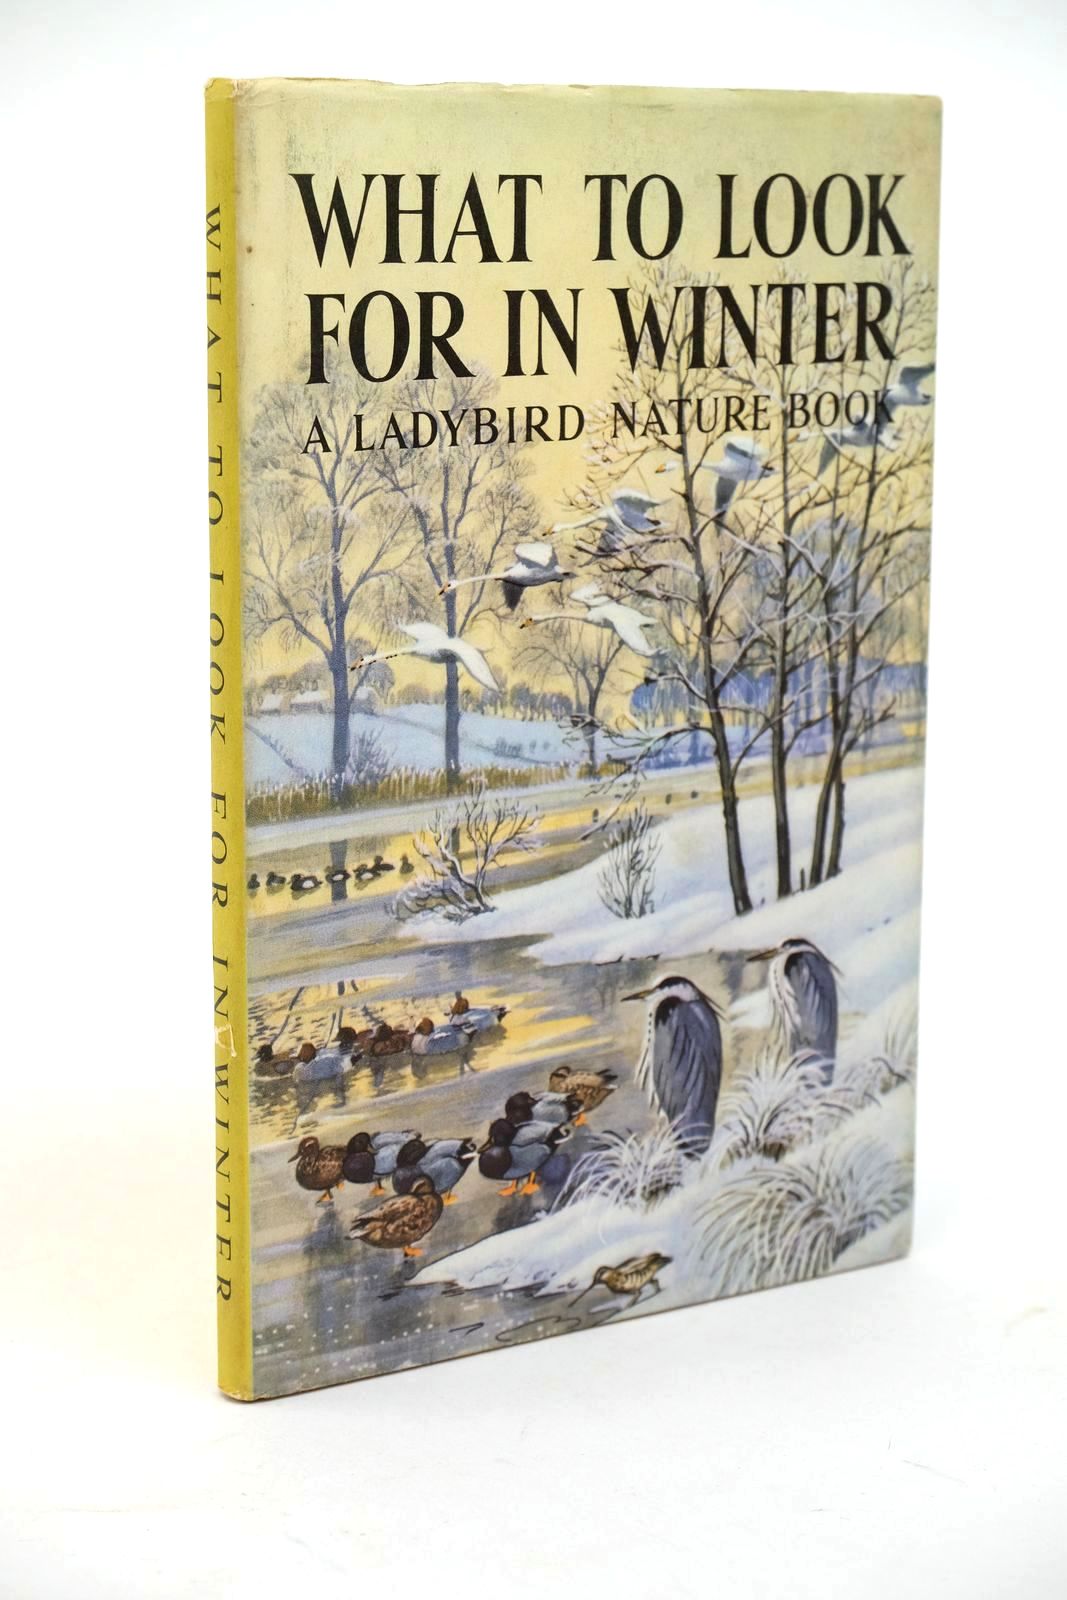 Photo of WHAT TO LOOK FOR IN WINTER written by Watson, E.L. Grant illustrated by Tunnicliffe, C.F. published by Wills &amp; Hepworth Ltd. (STOCK CODE: 1323143)  for sale by Stella & Rose's Books